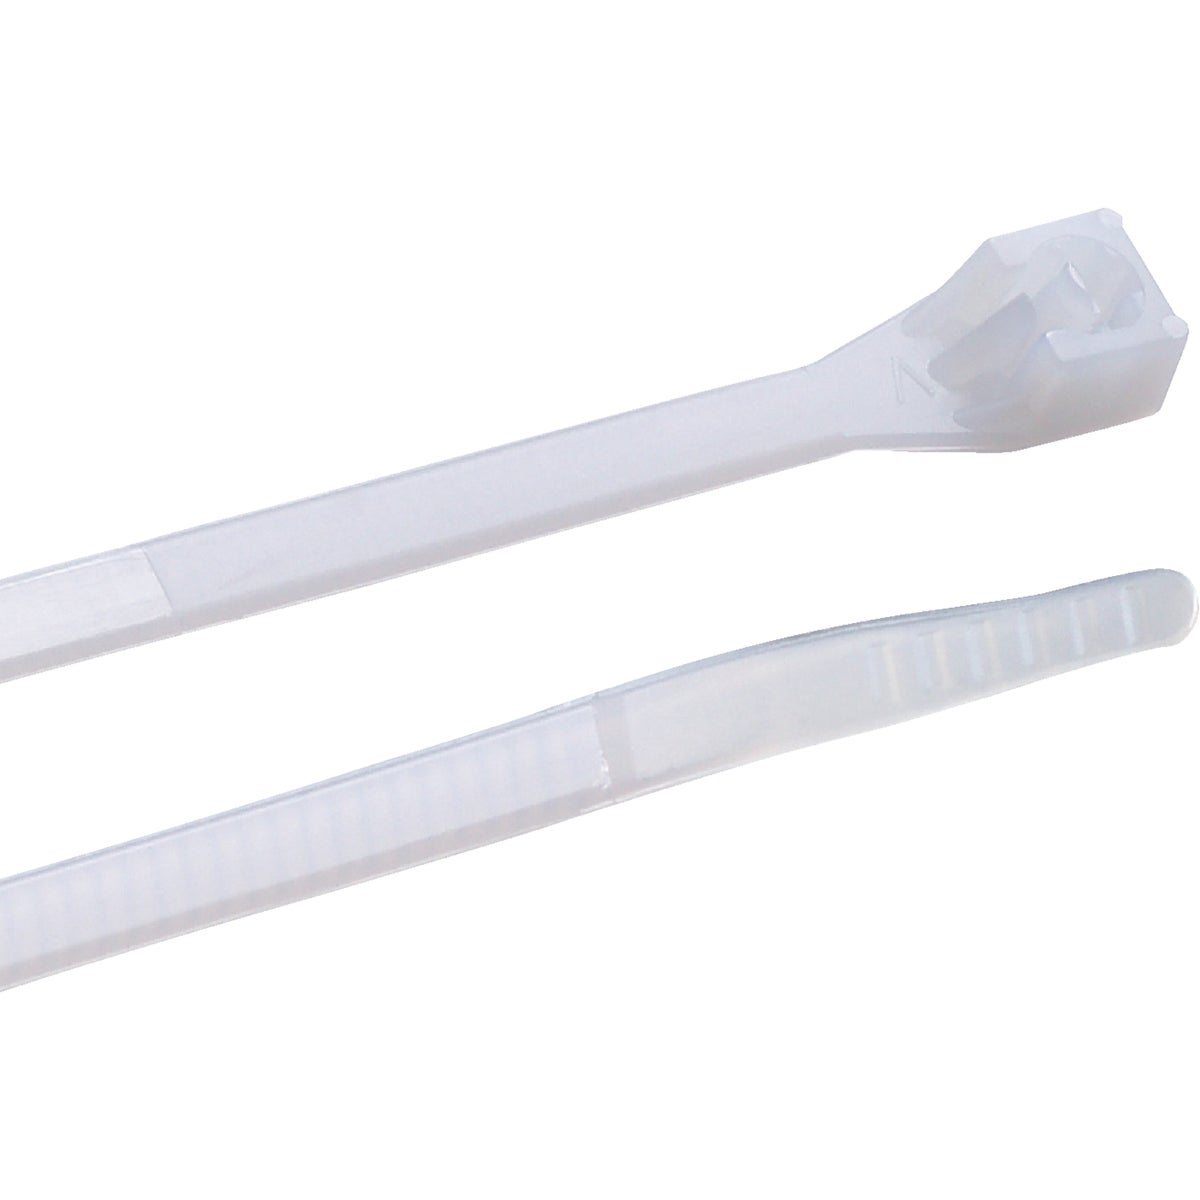 Item 501133, Releasable cable tie that temporarily fastens wires, cables, and hoses.